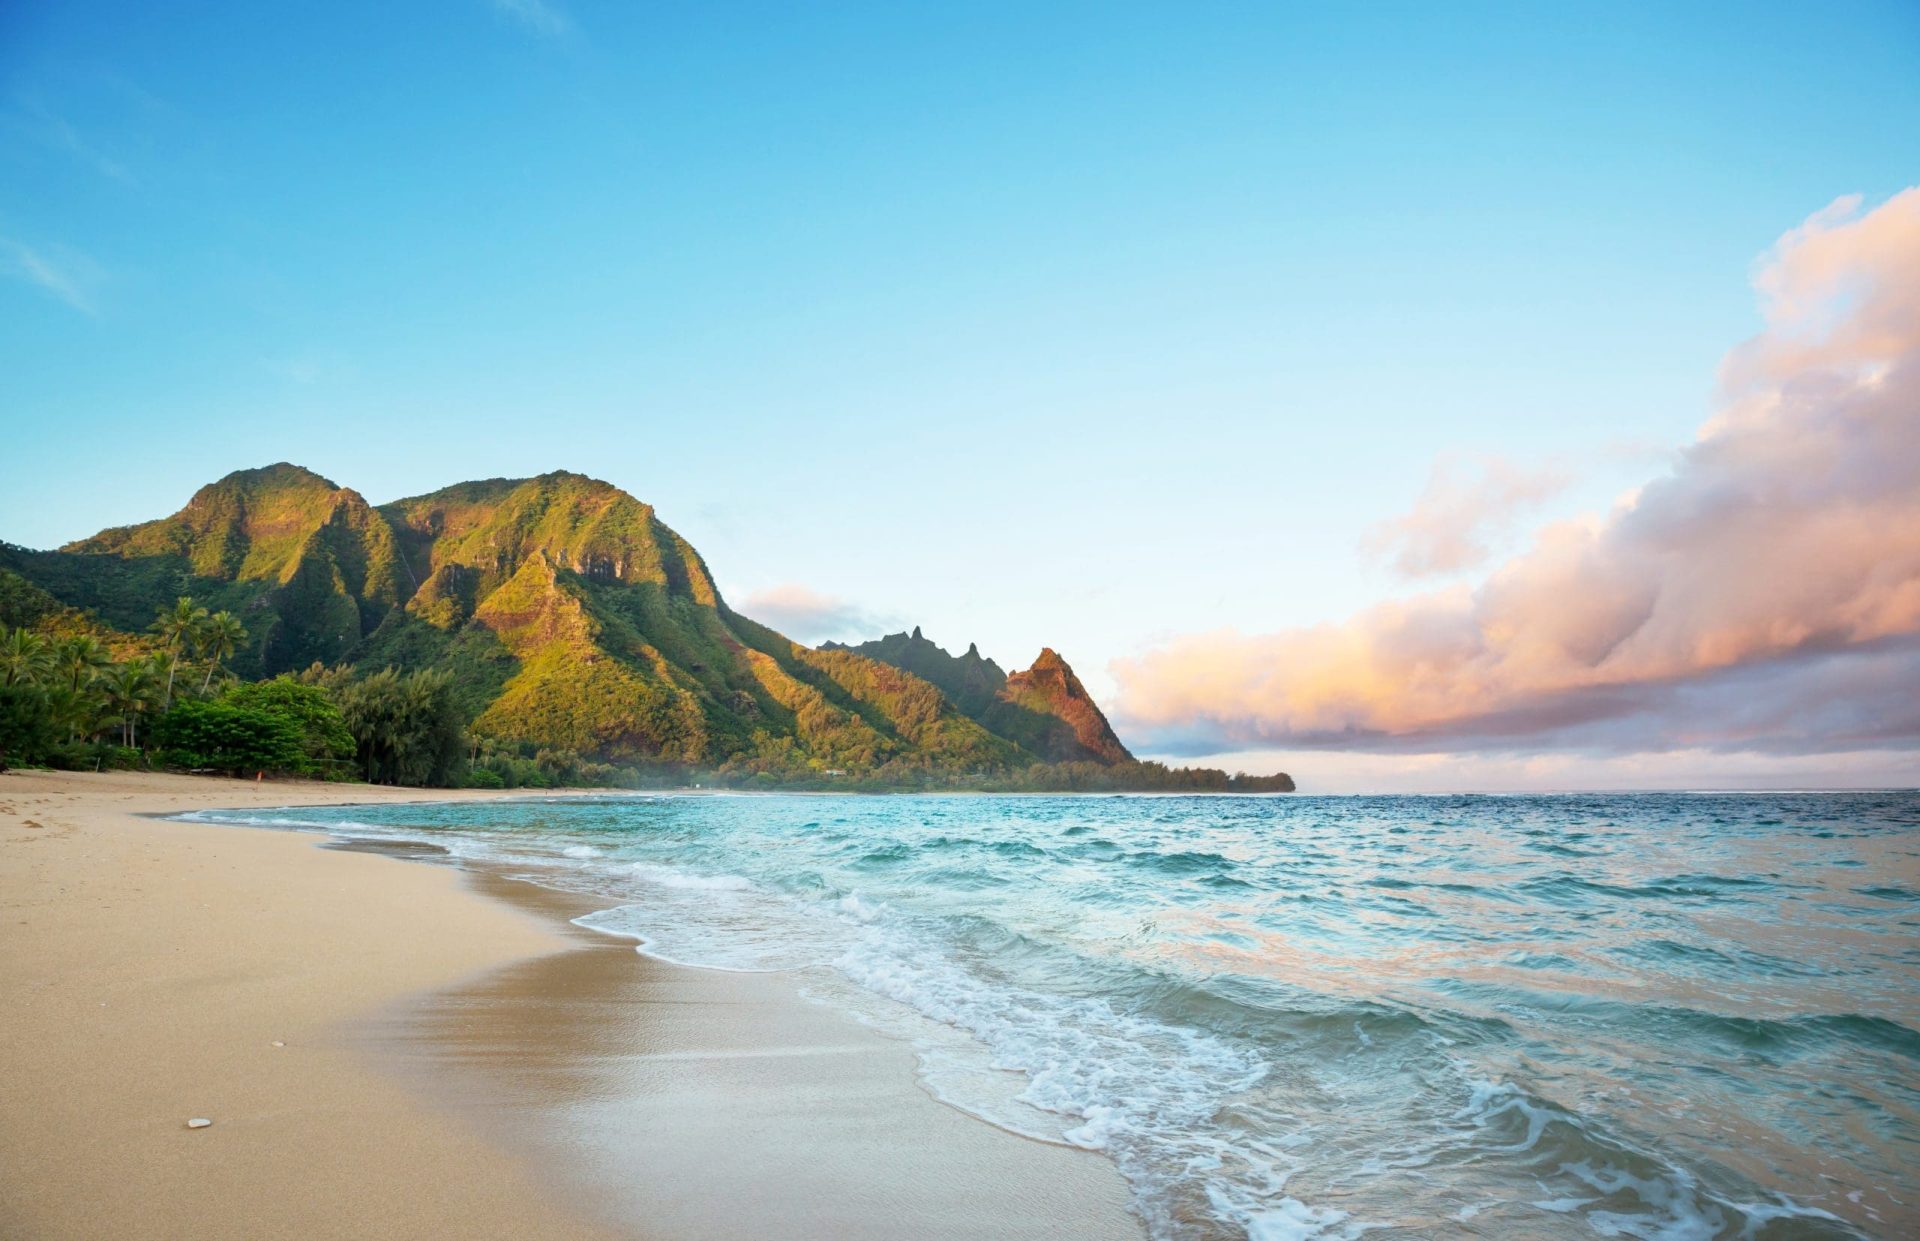 What are the Four Main Islands of Hawaii?